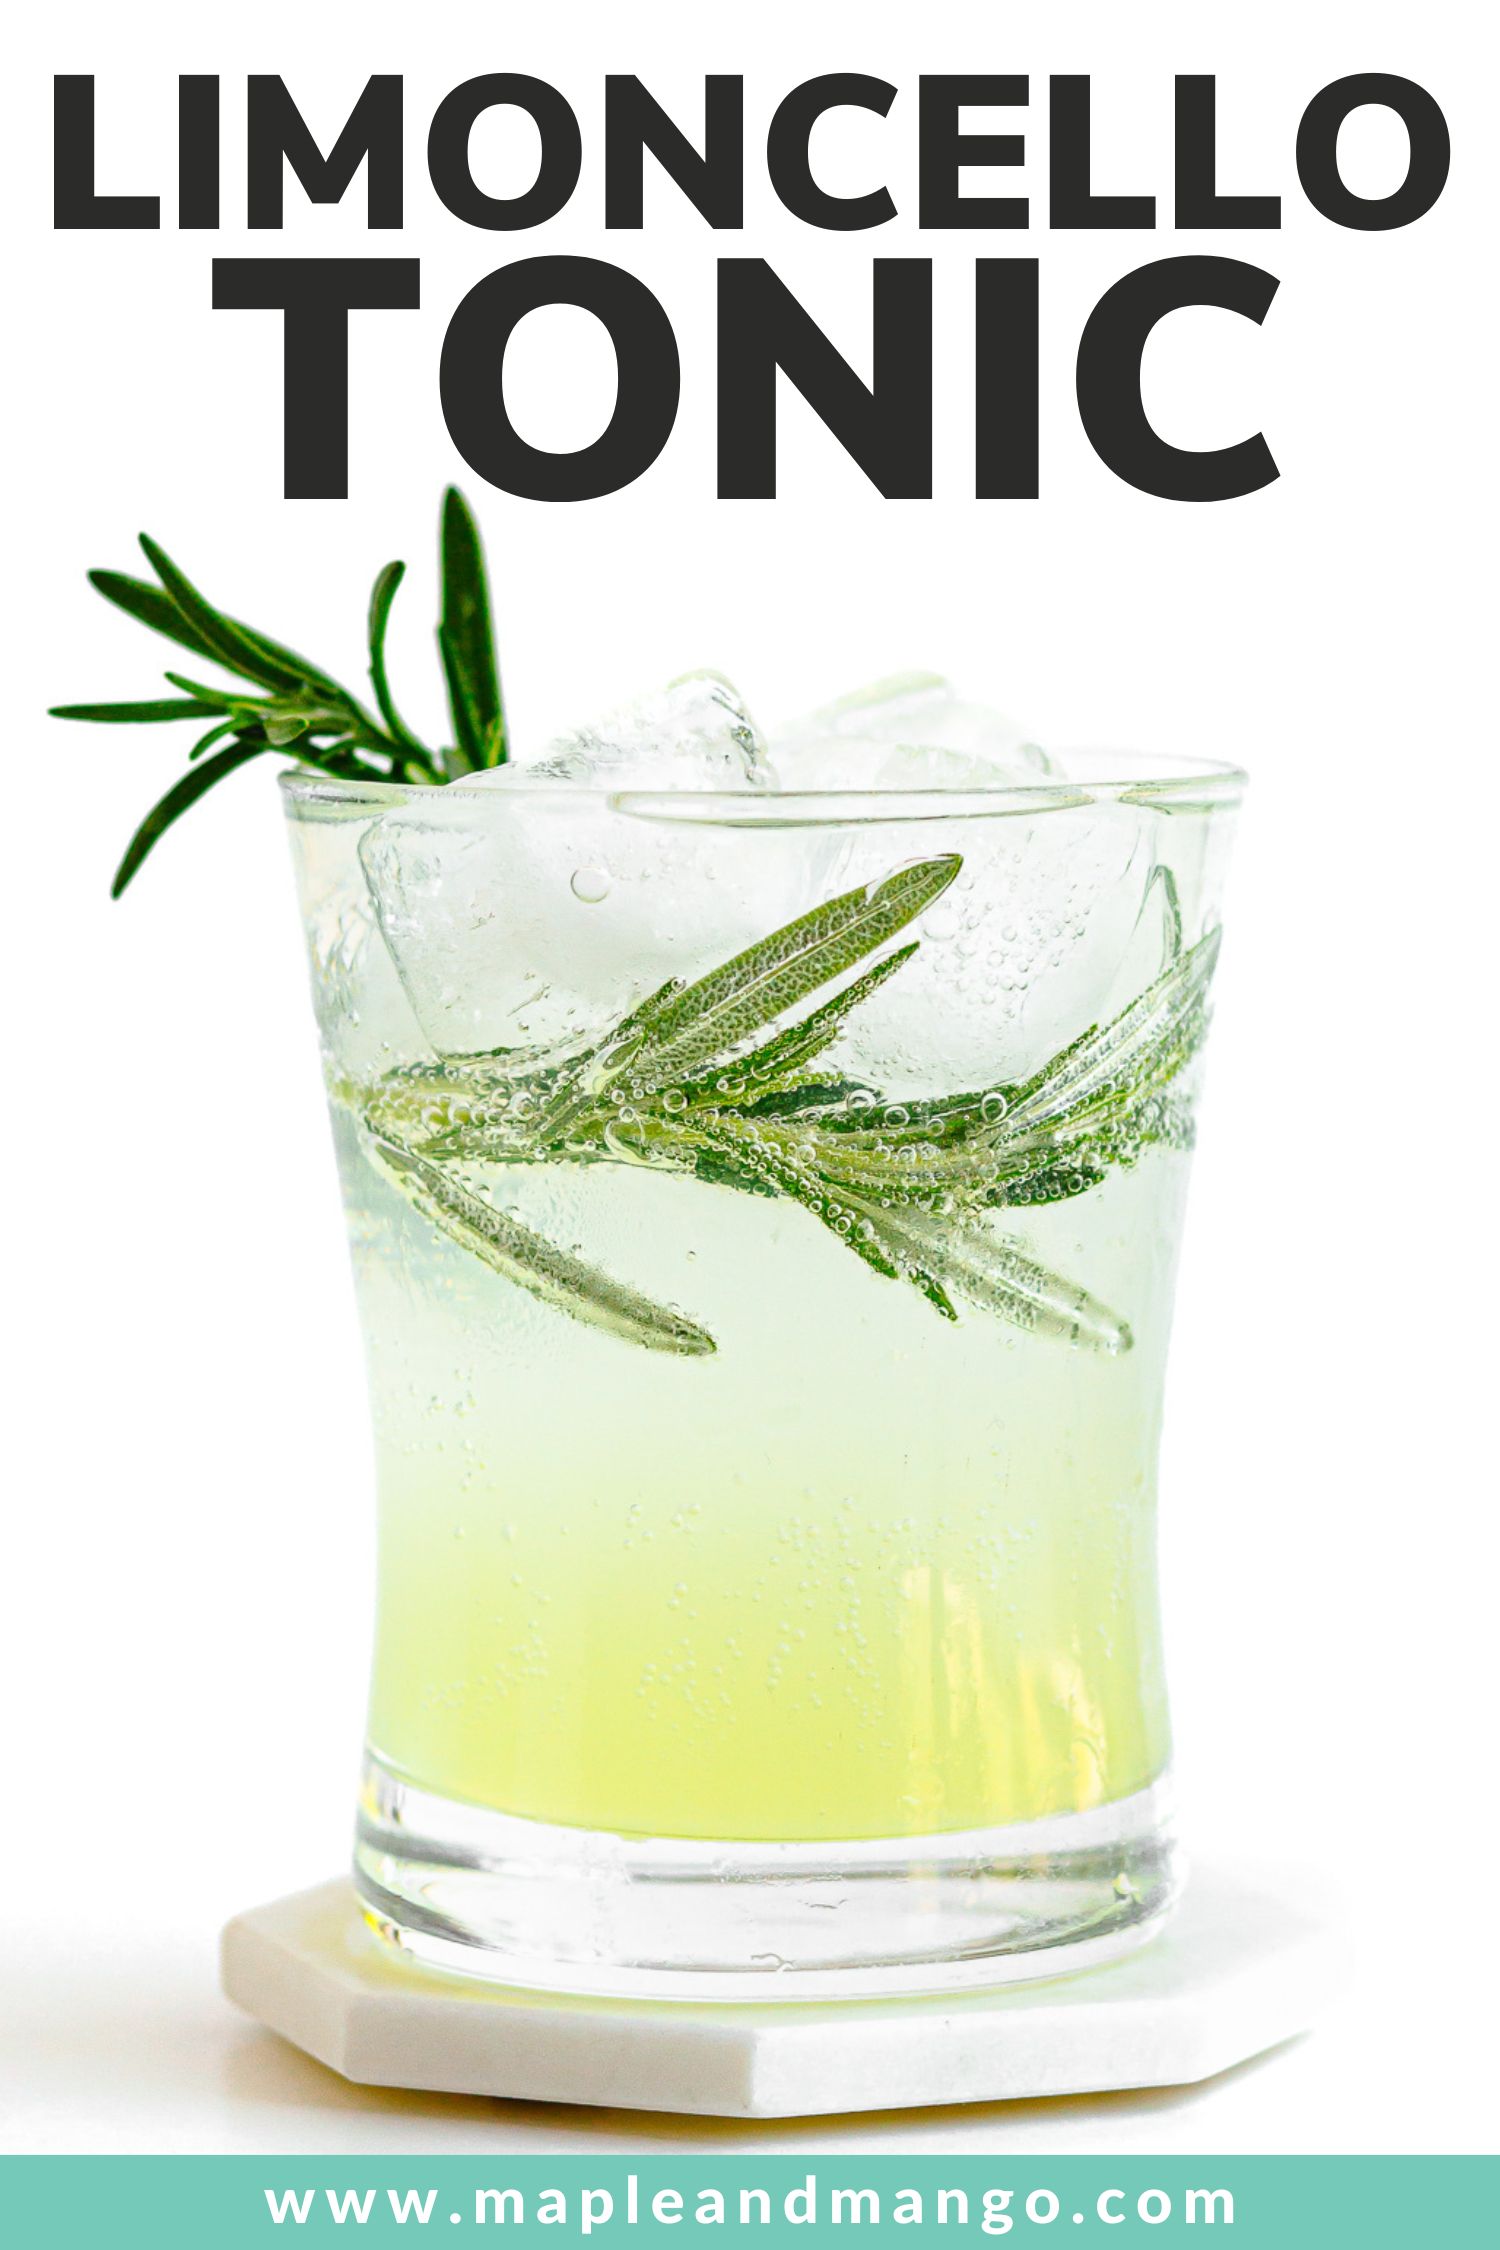 Pinterest graphic featuring a glass of limoncello and tonic garnished with rosemary.